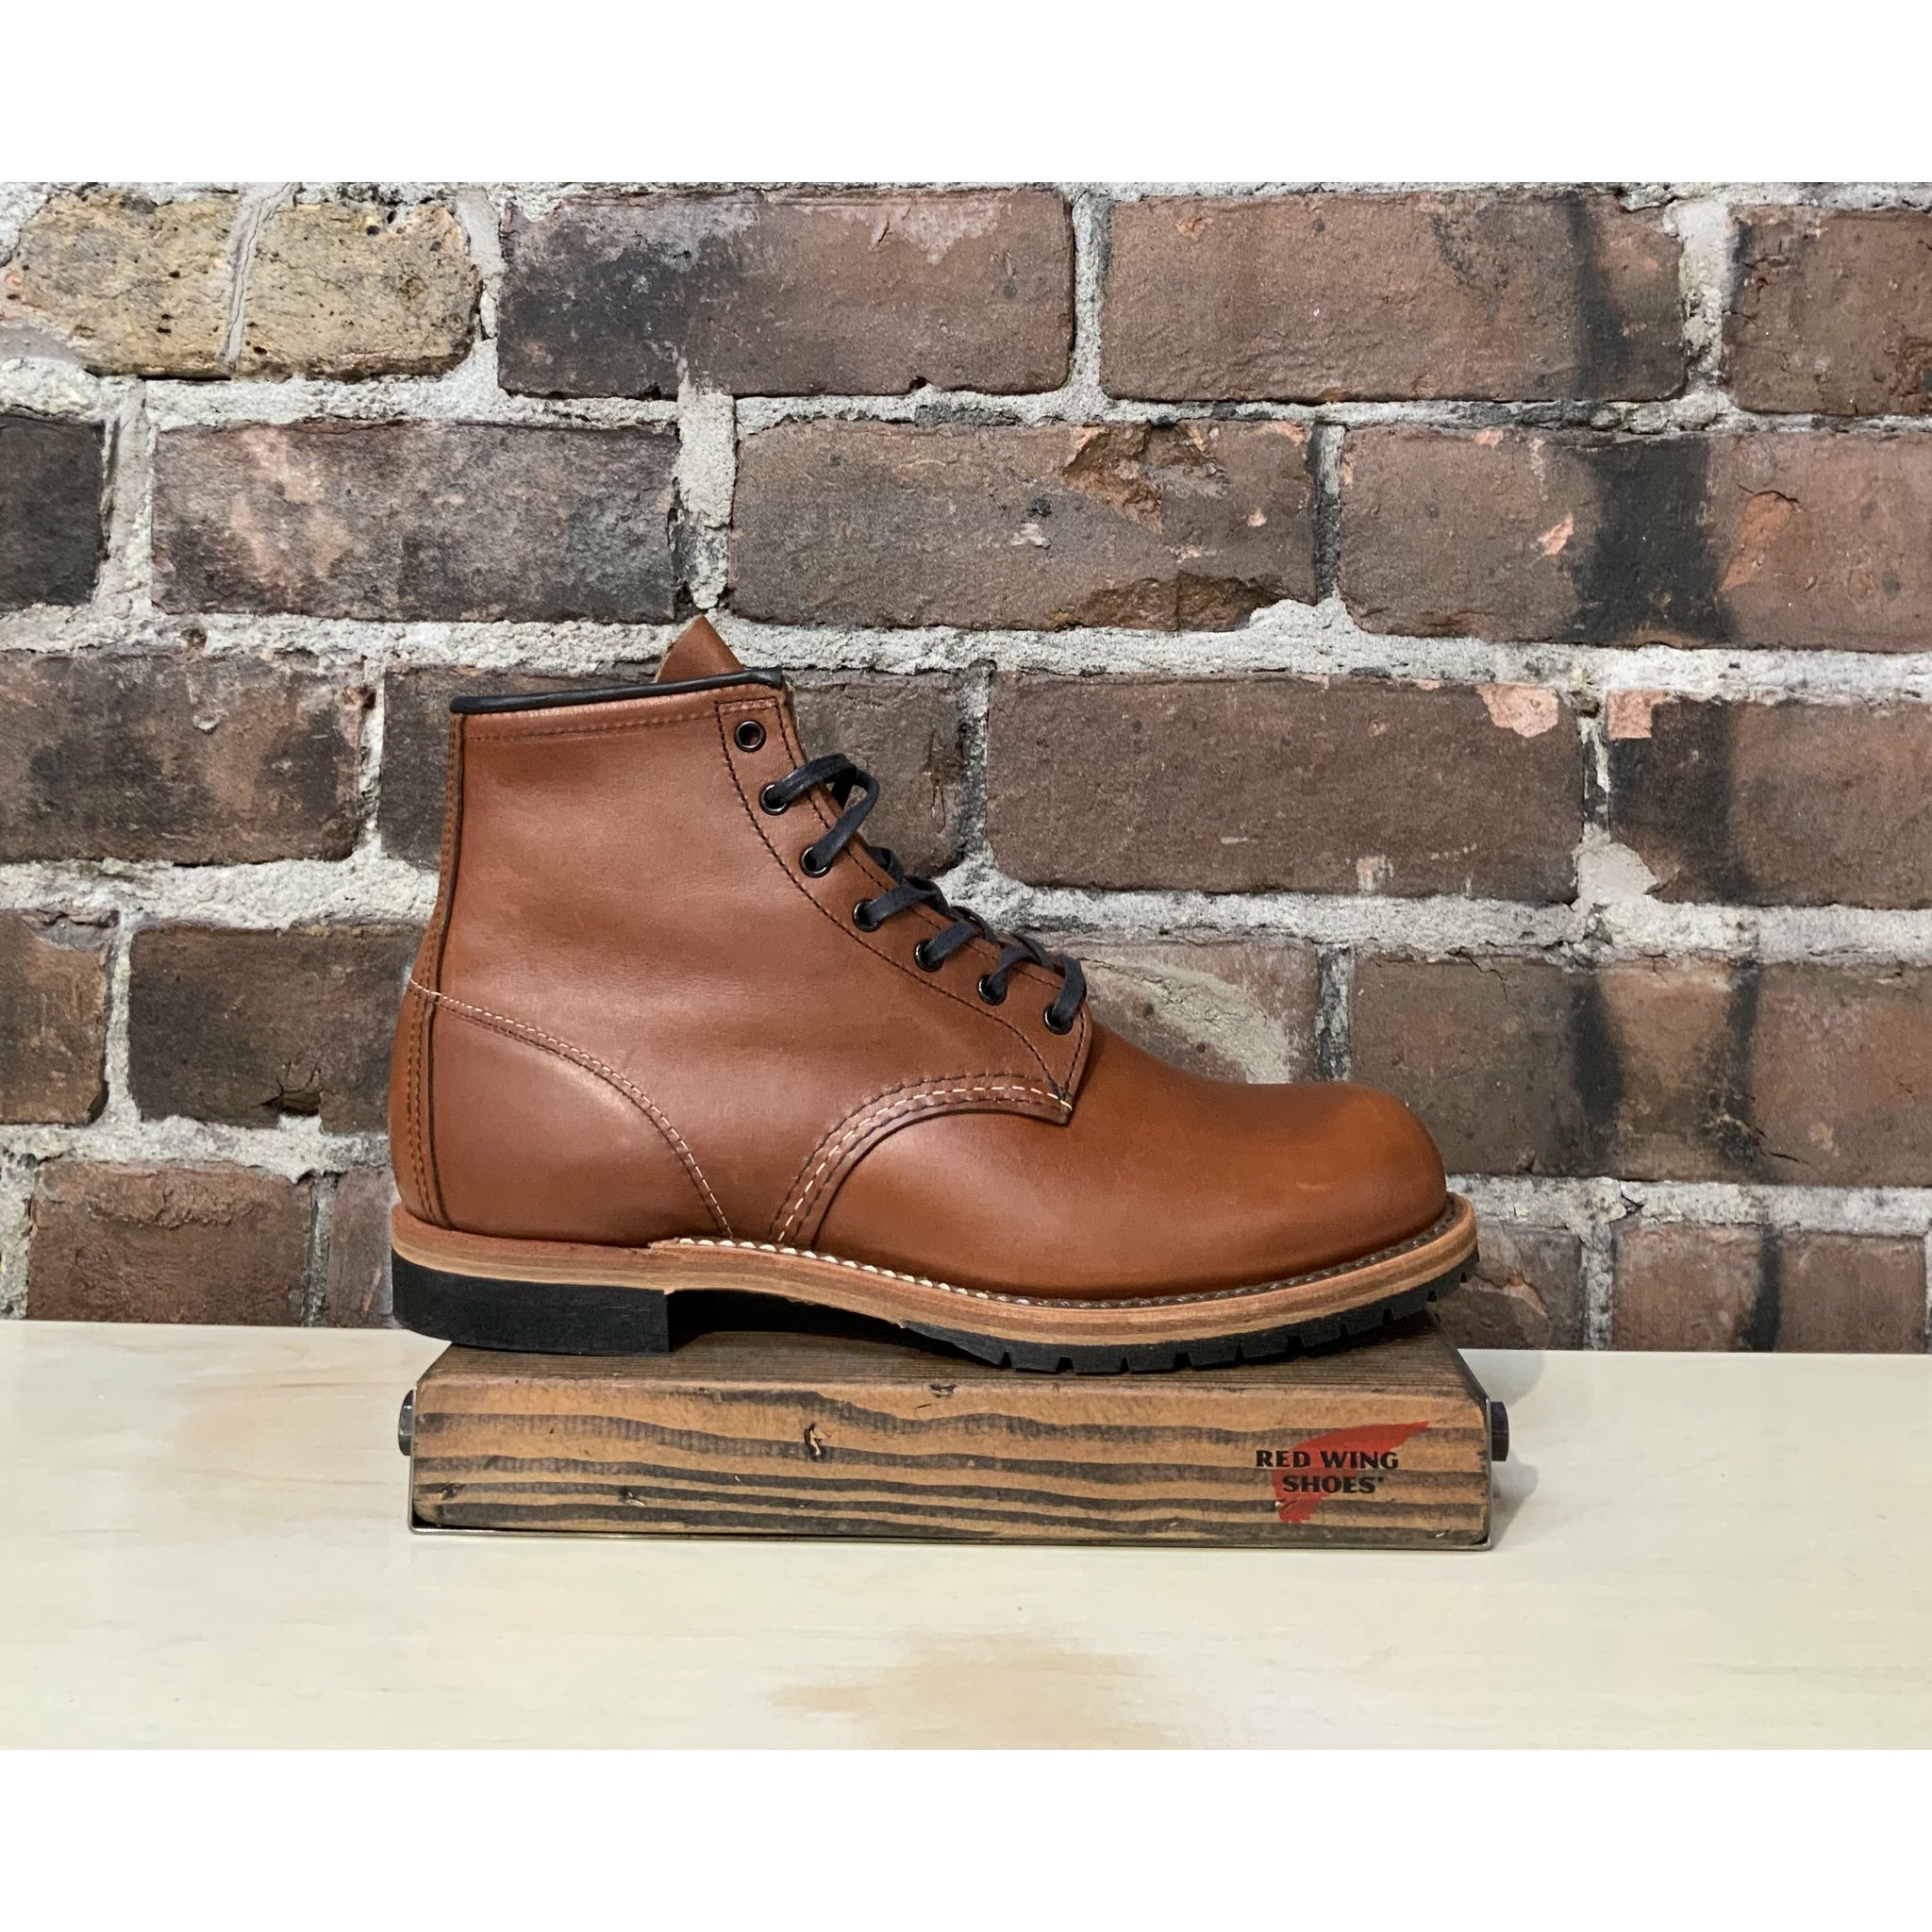 RED WING beckman